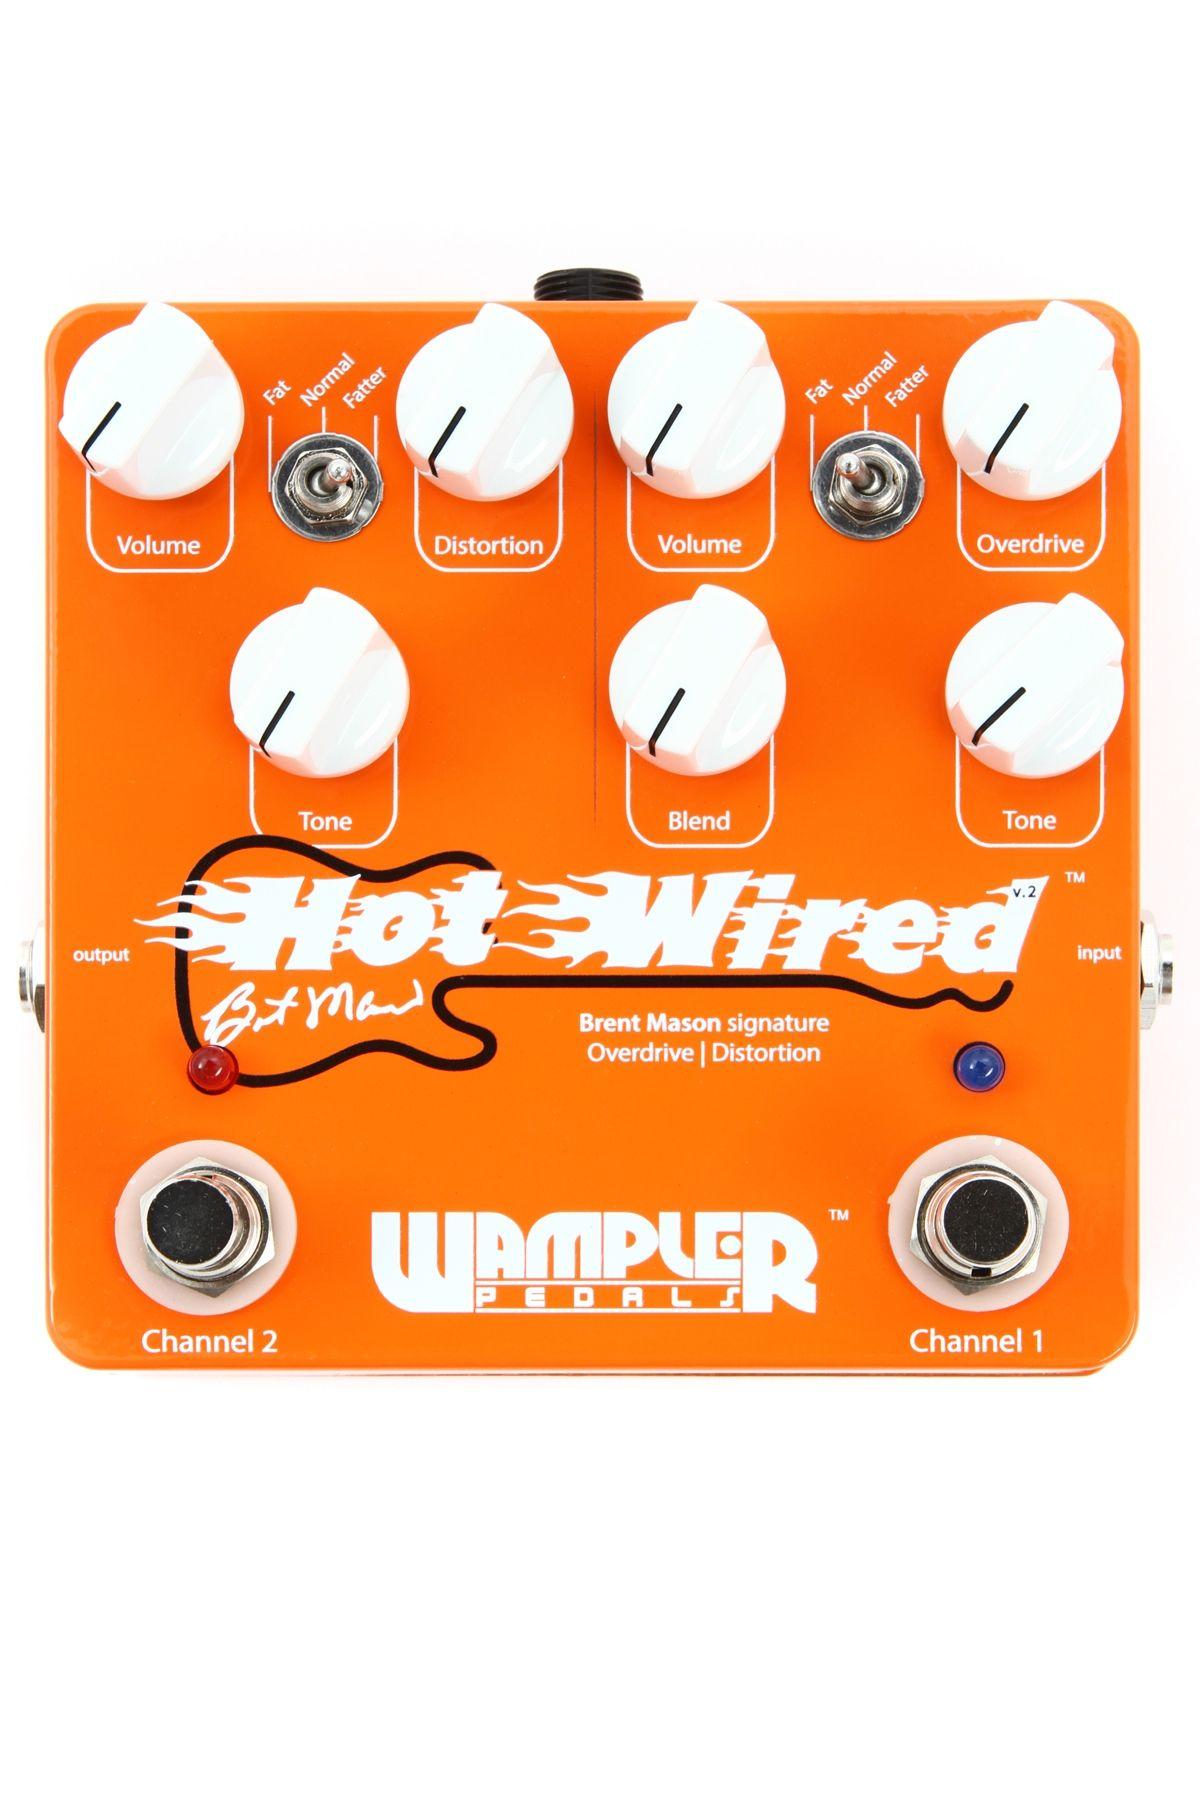 Hotwired Logo - Details about Wampler Brent Mason Hot Wired V2 Signature Overdrive